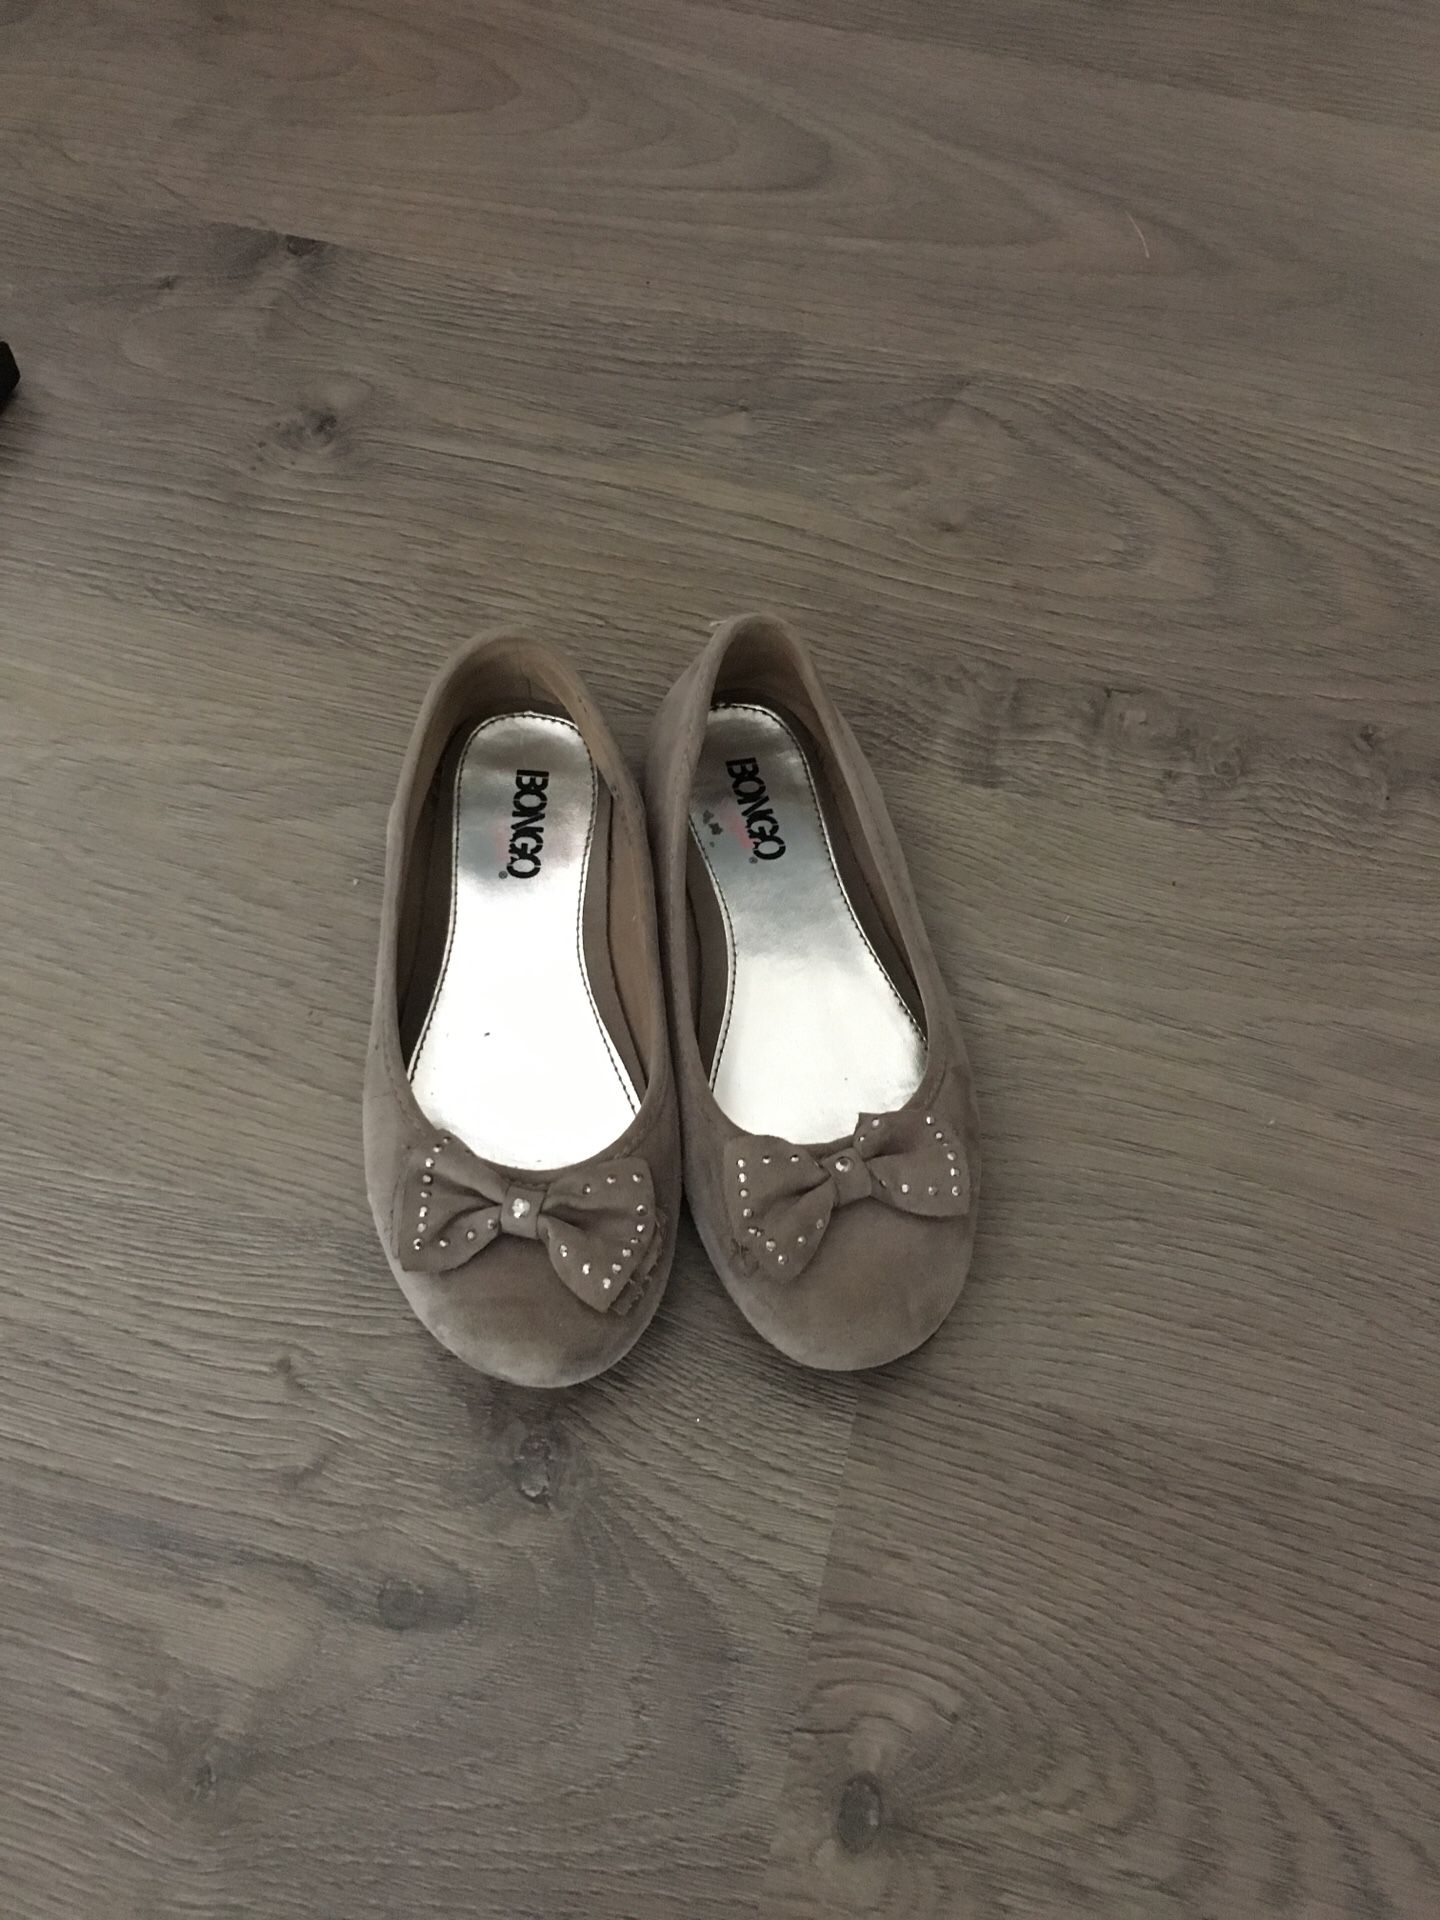 Kids Girls ballerina flats/ shoes - Taupe size 3